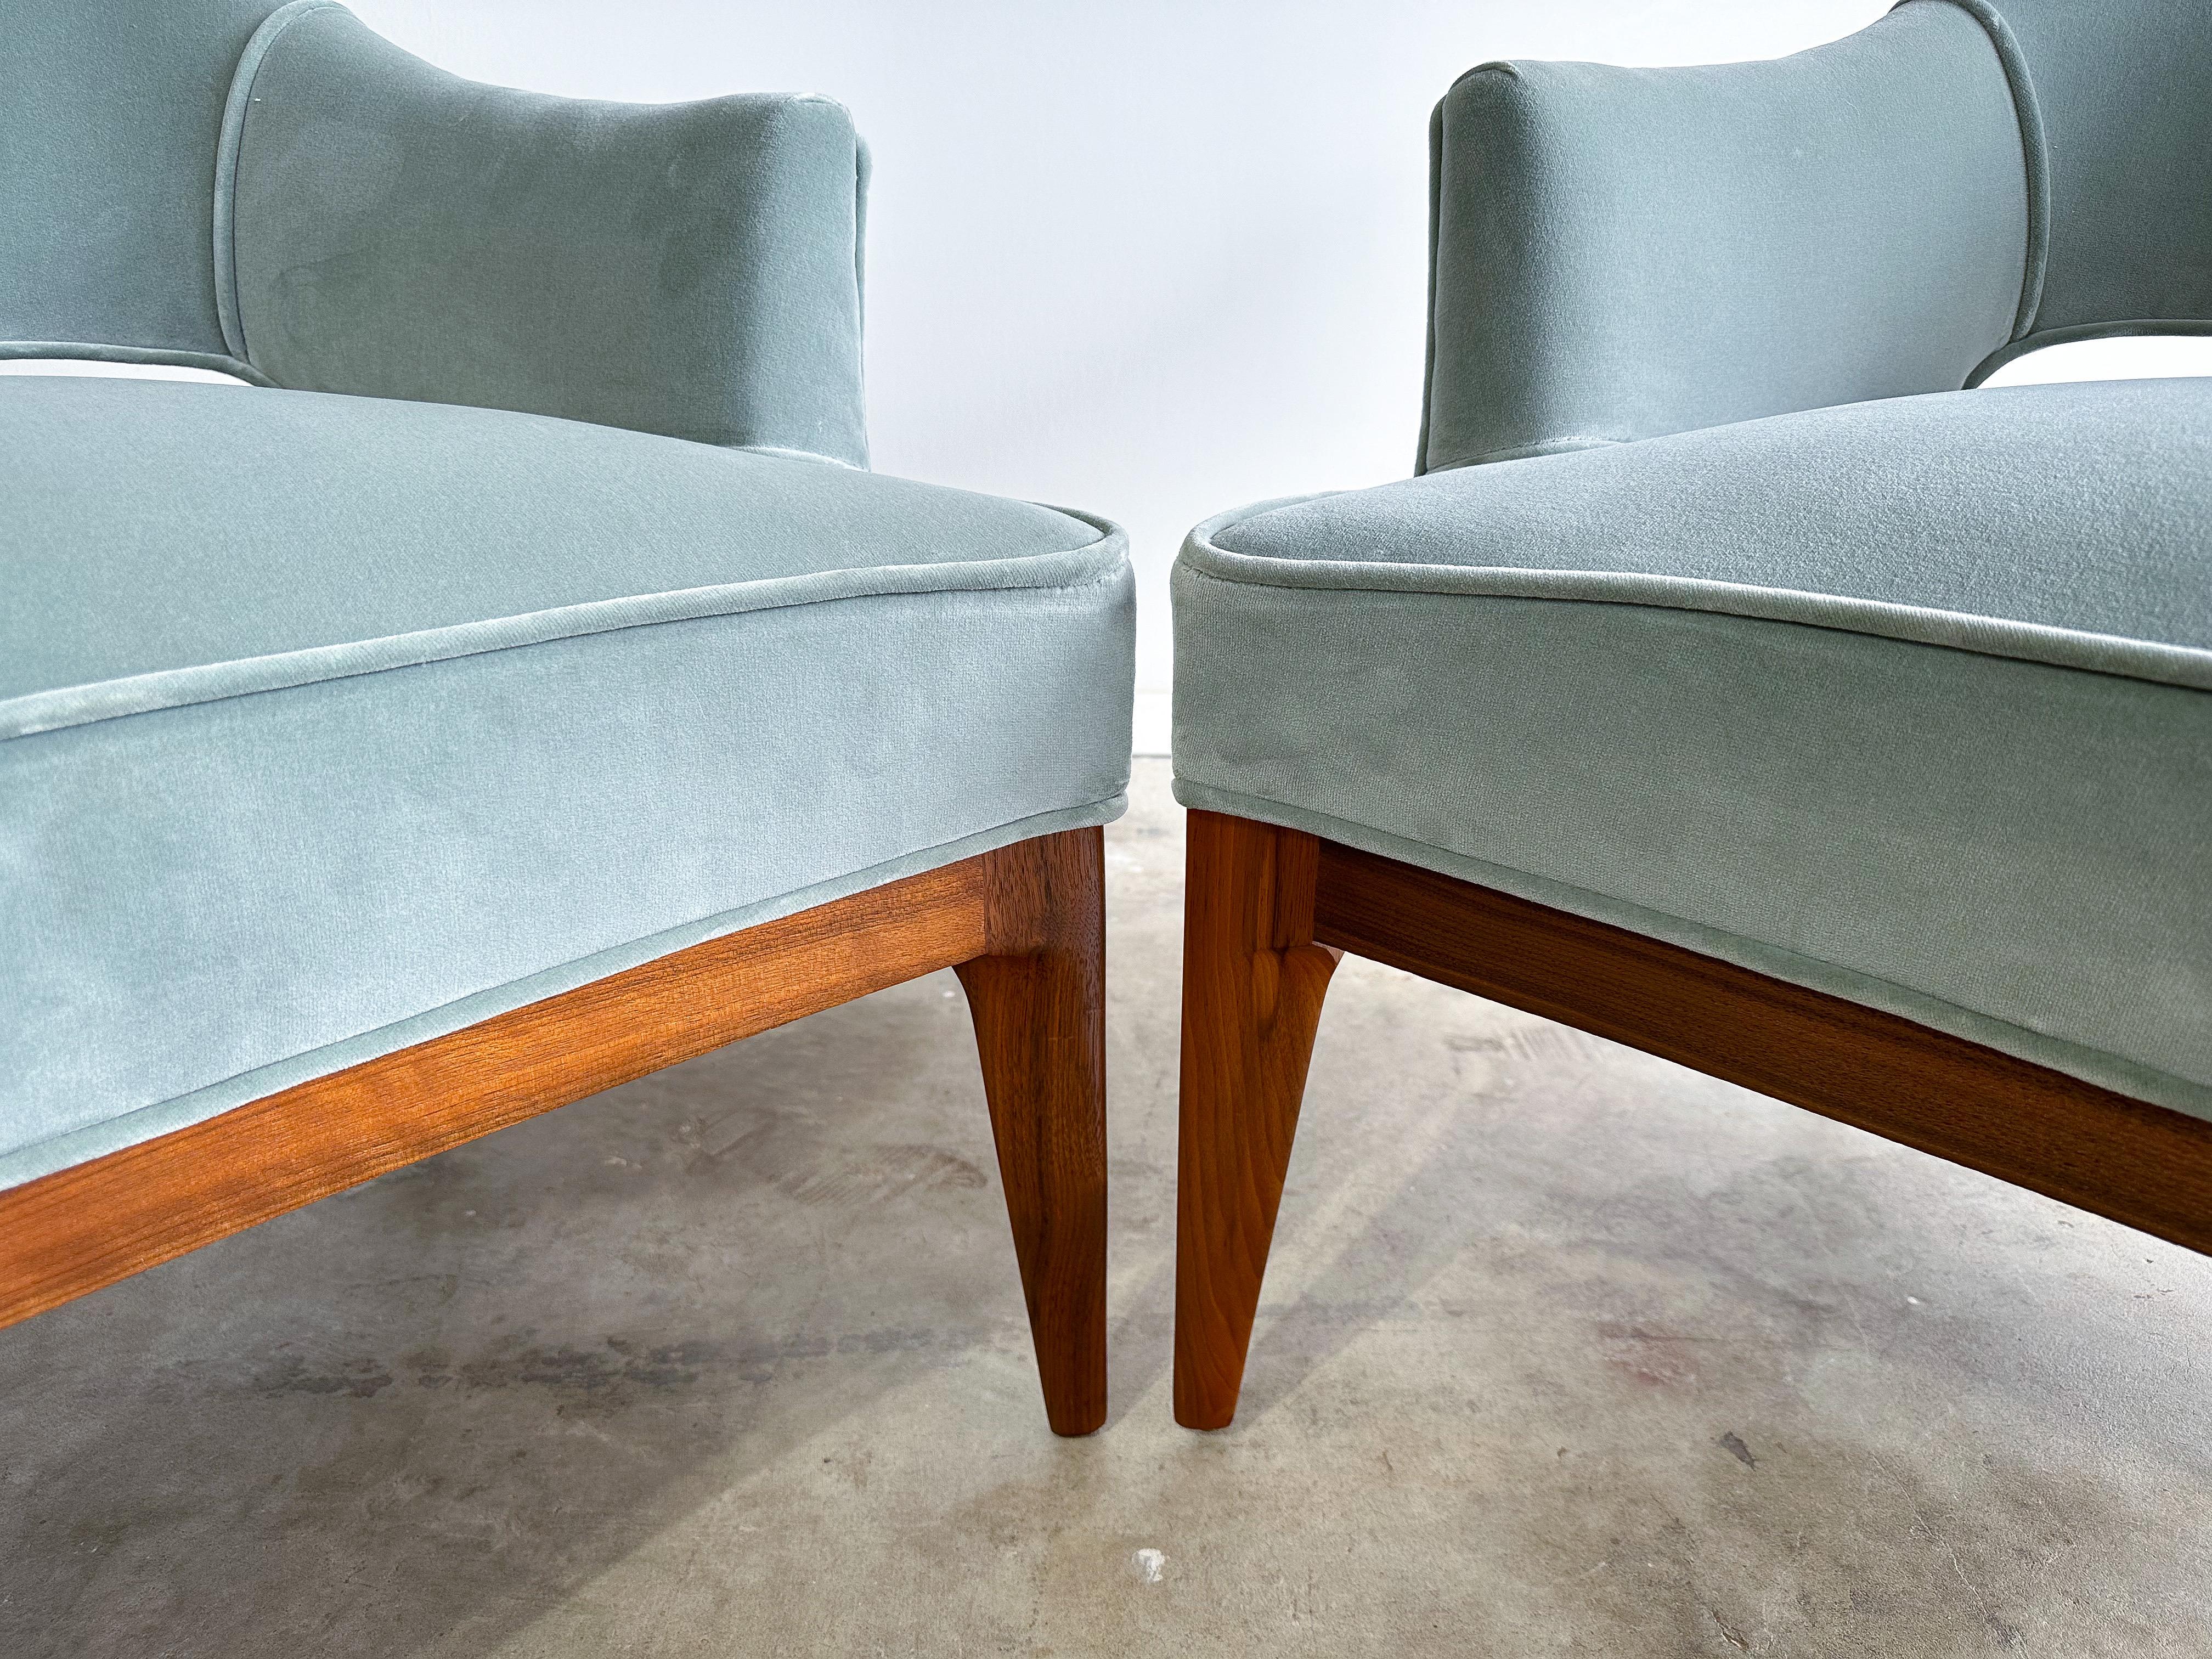 Pair of Lounge Chairs Attributed to Harvey Probber, Erwin Lambeth, 1960s For Sale 2